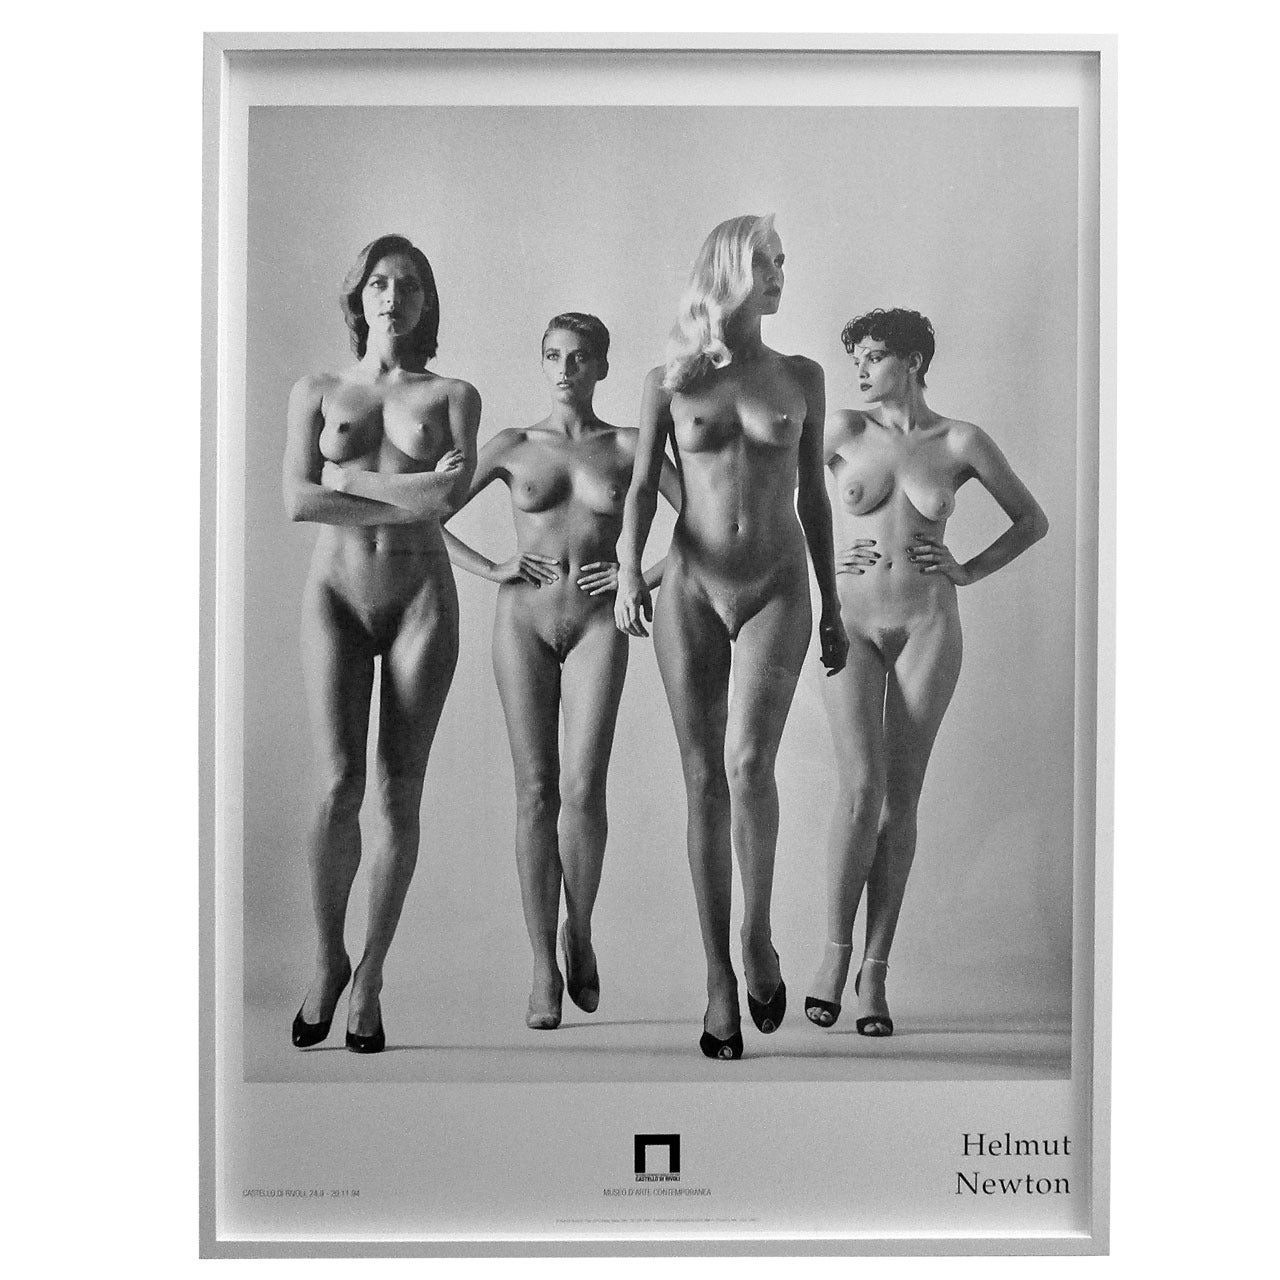 HELMUT NEWTON  -  a LARGE FRAMED EXHIBITION POSTER - ITALY 1994